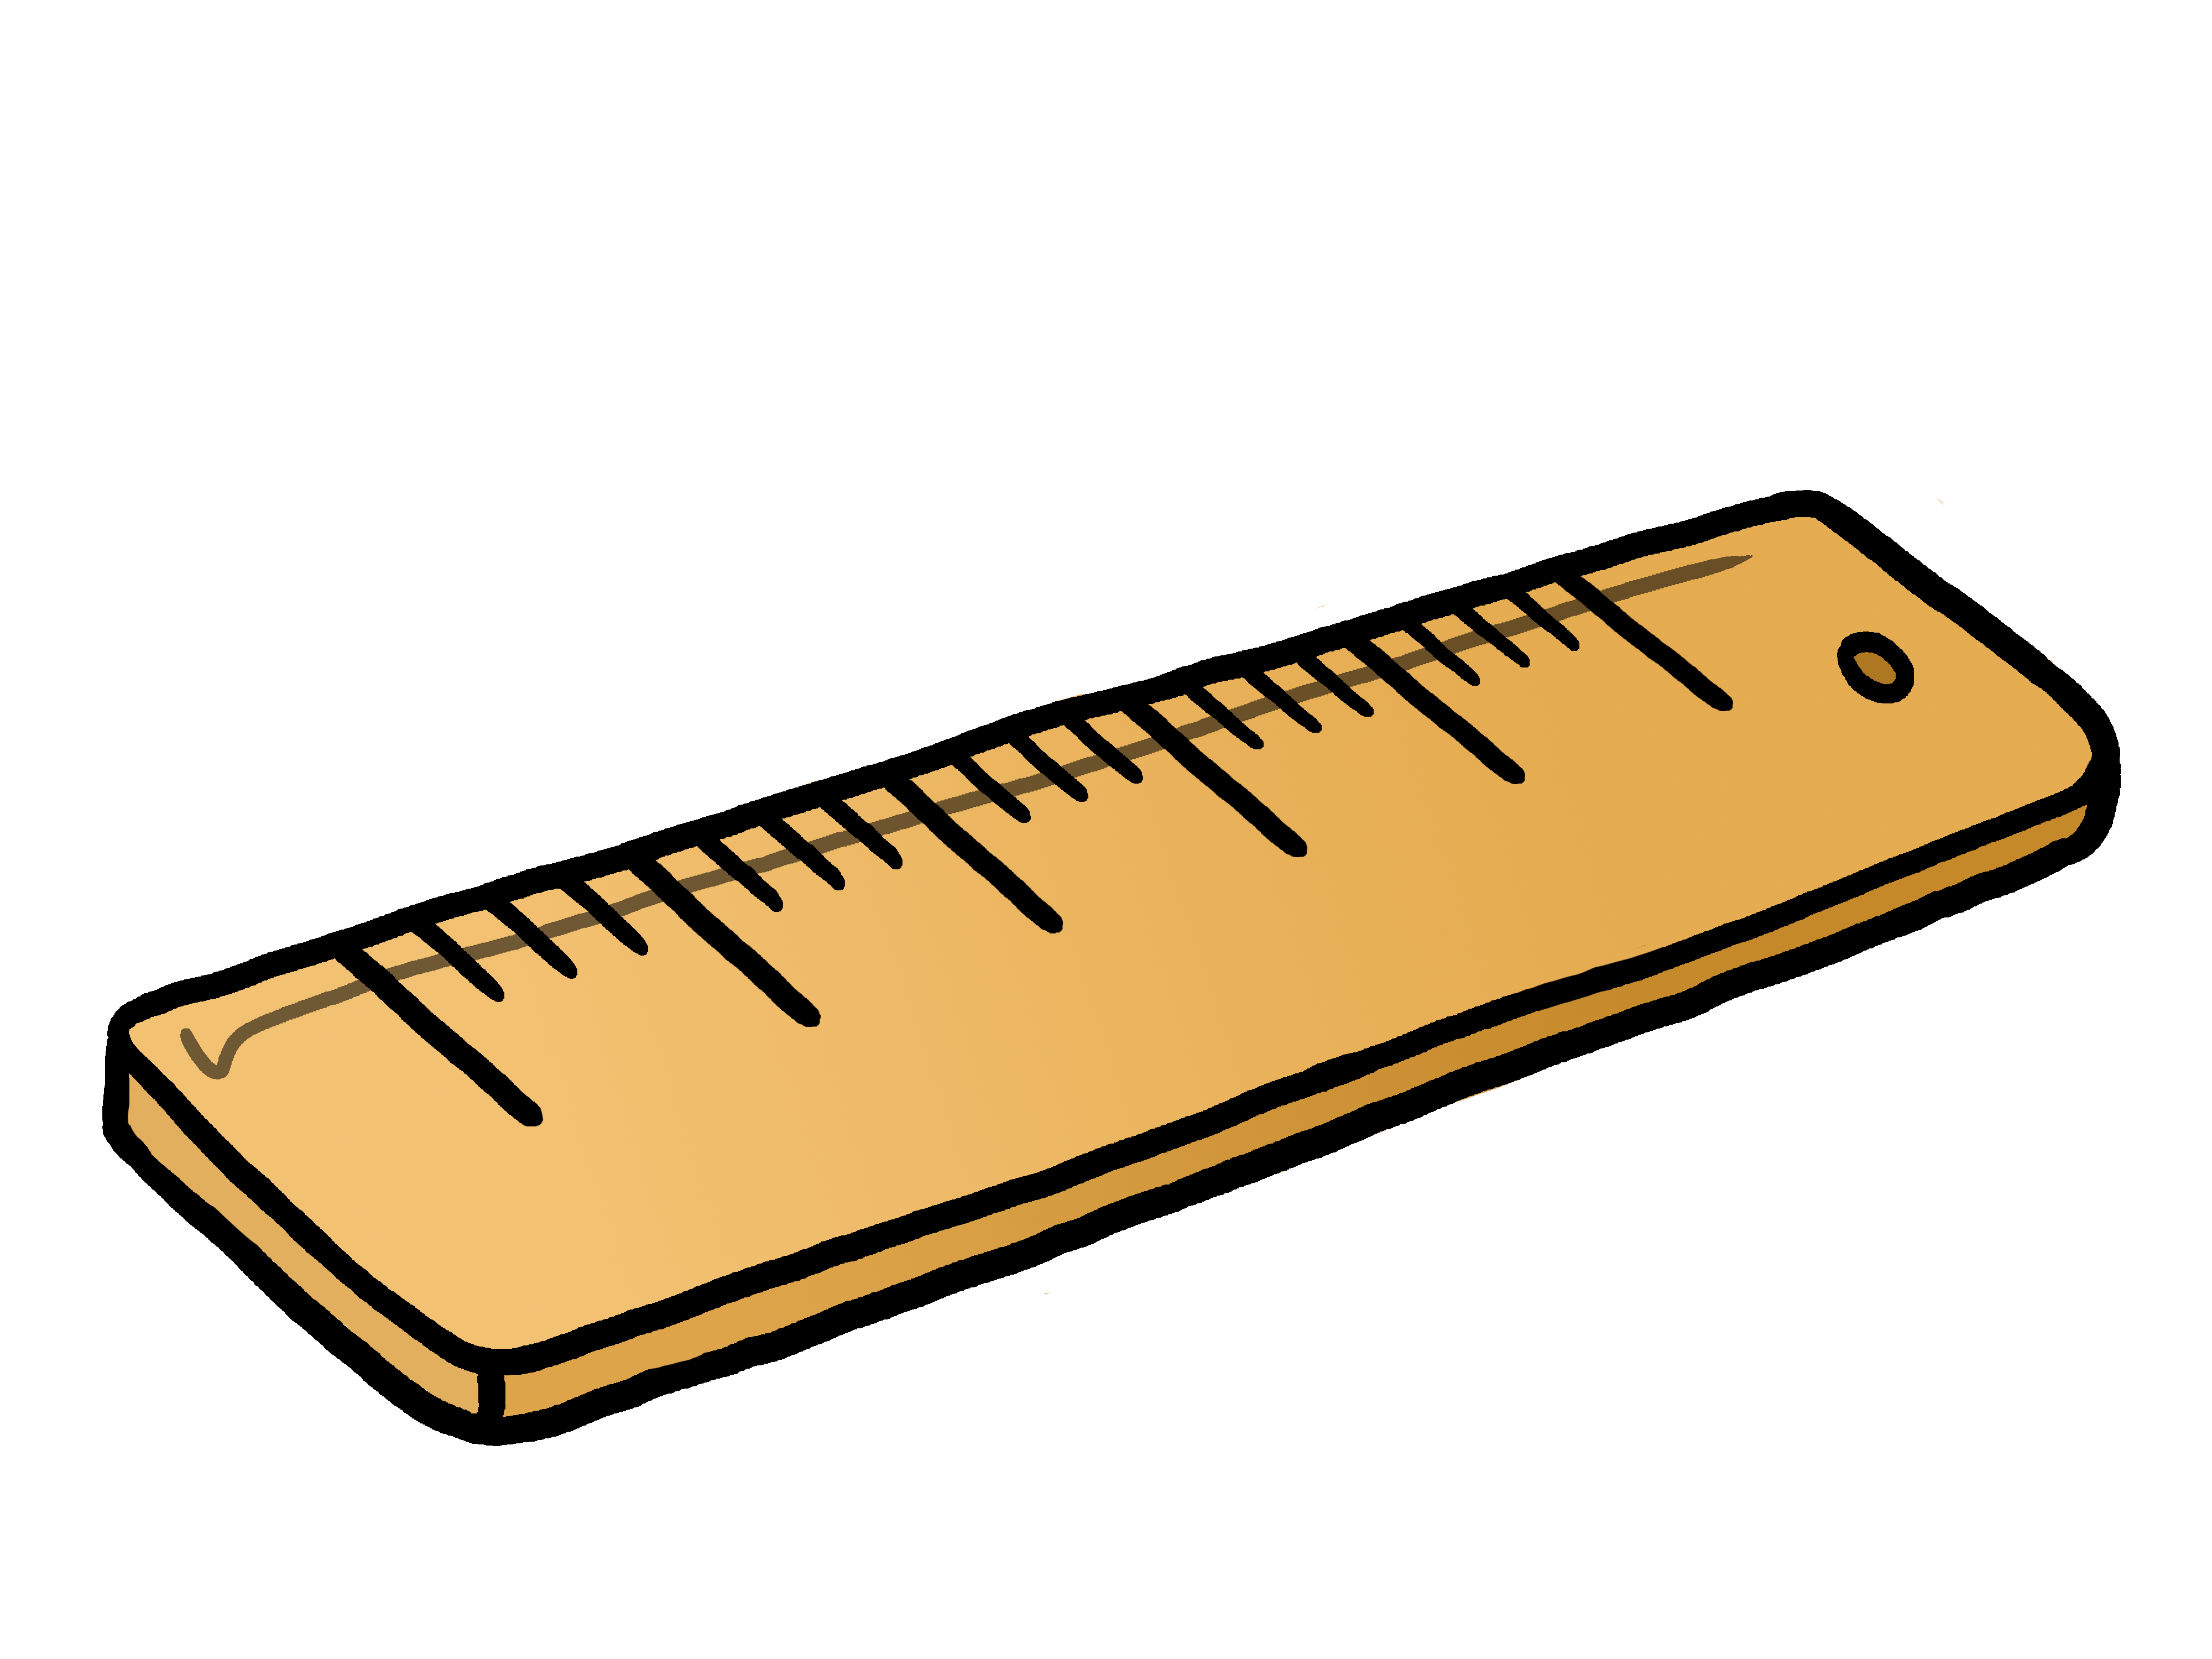 Ruler Clip Art Image Inches 1 8 1 4 1 2 